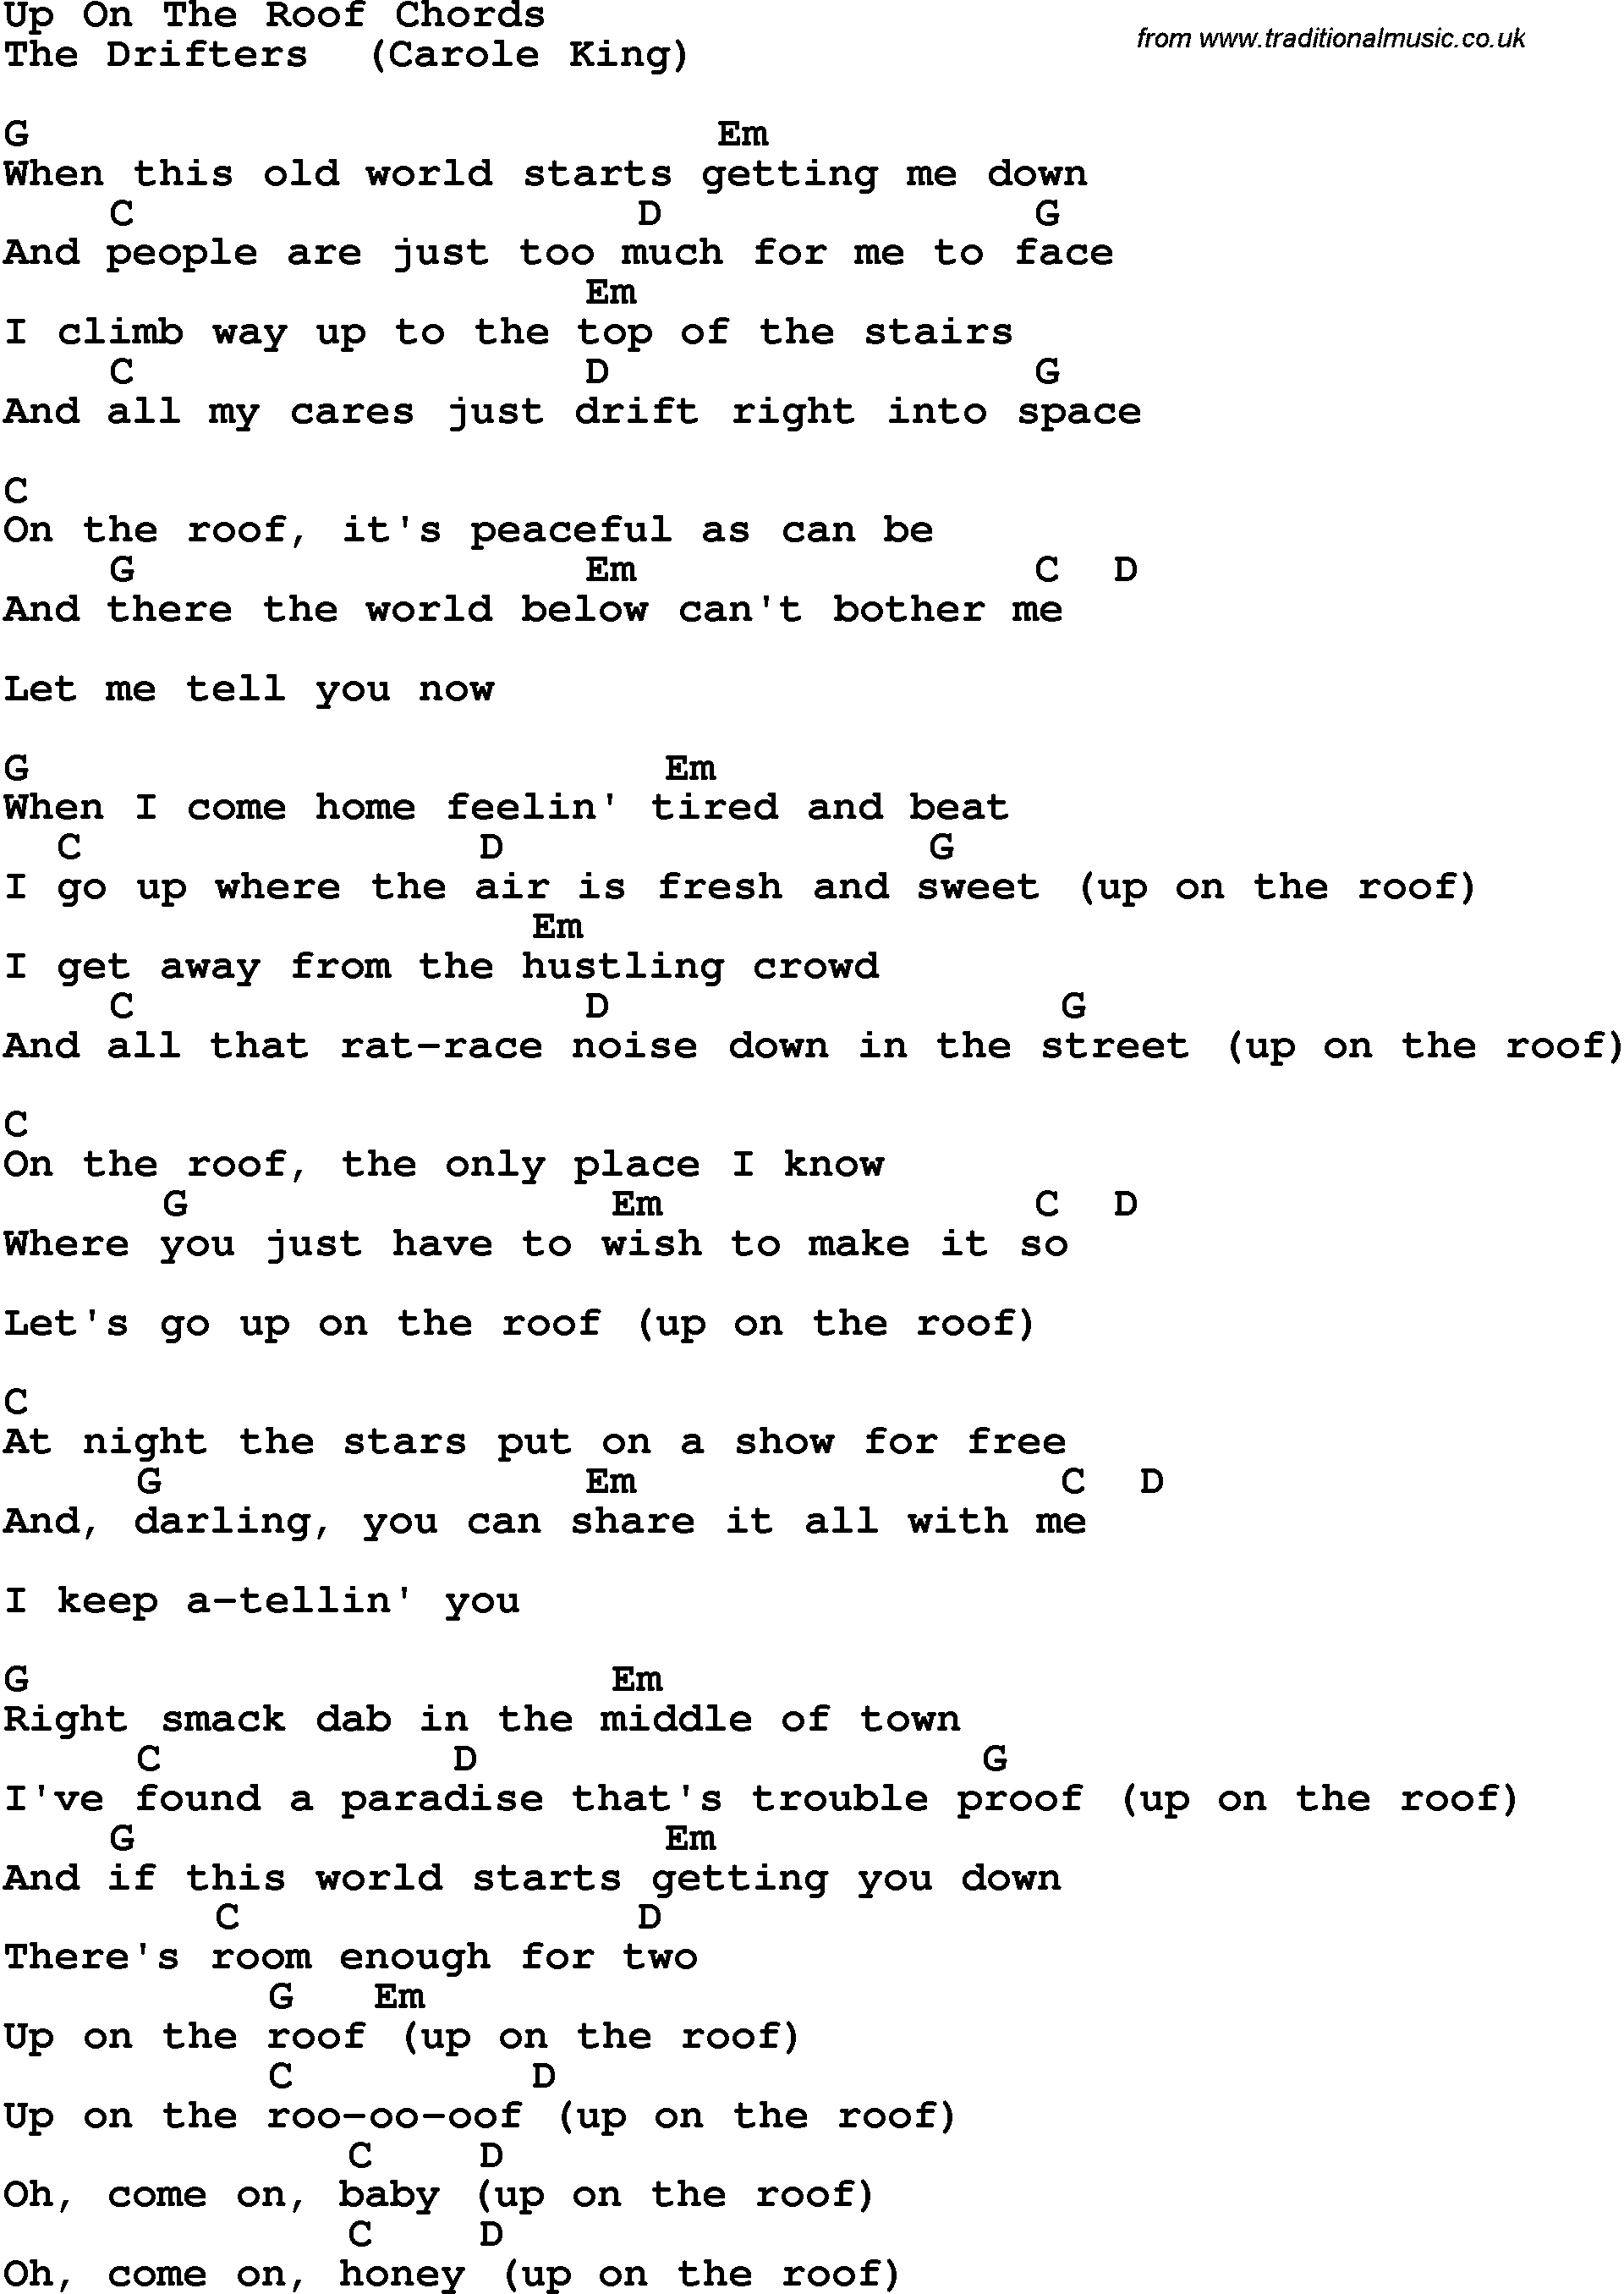 Song Lyrics with guitar chords for Up On The Roof